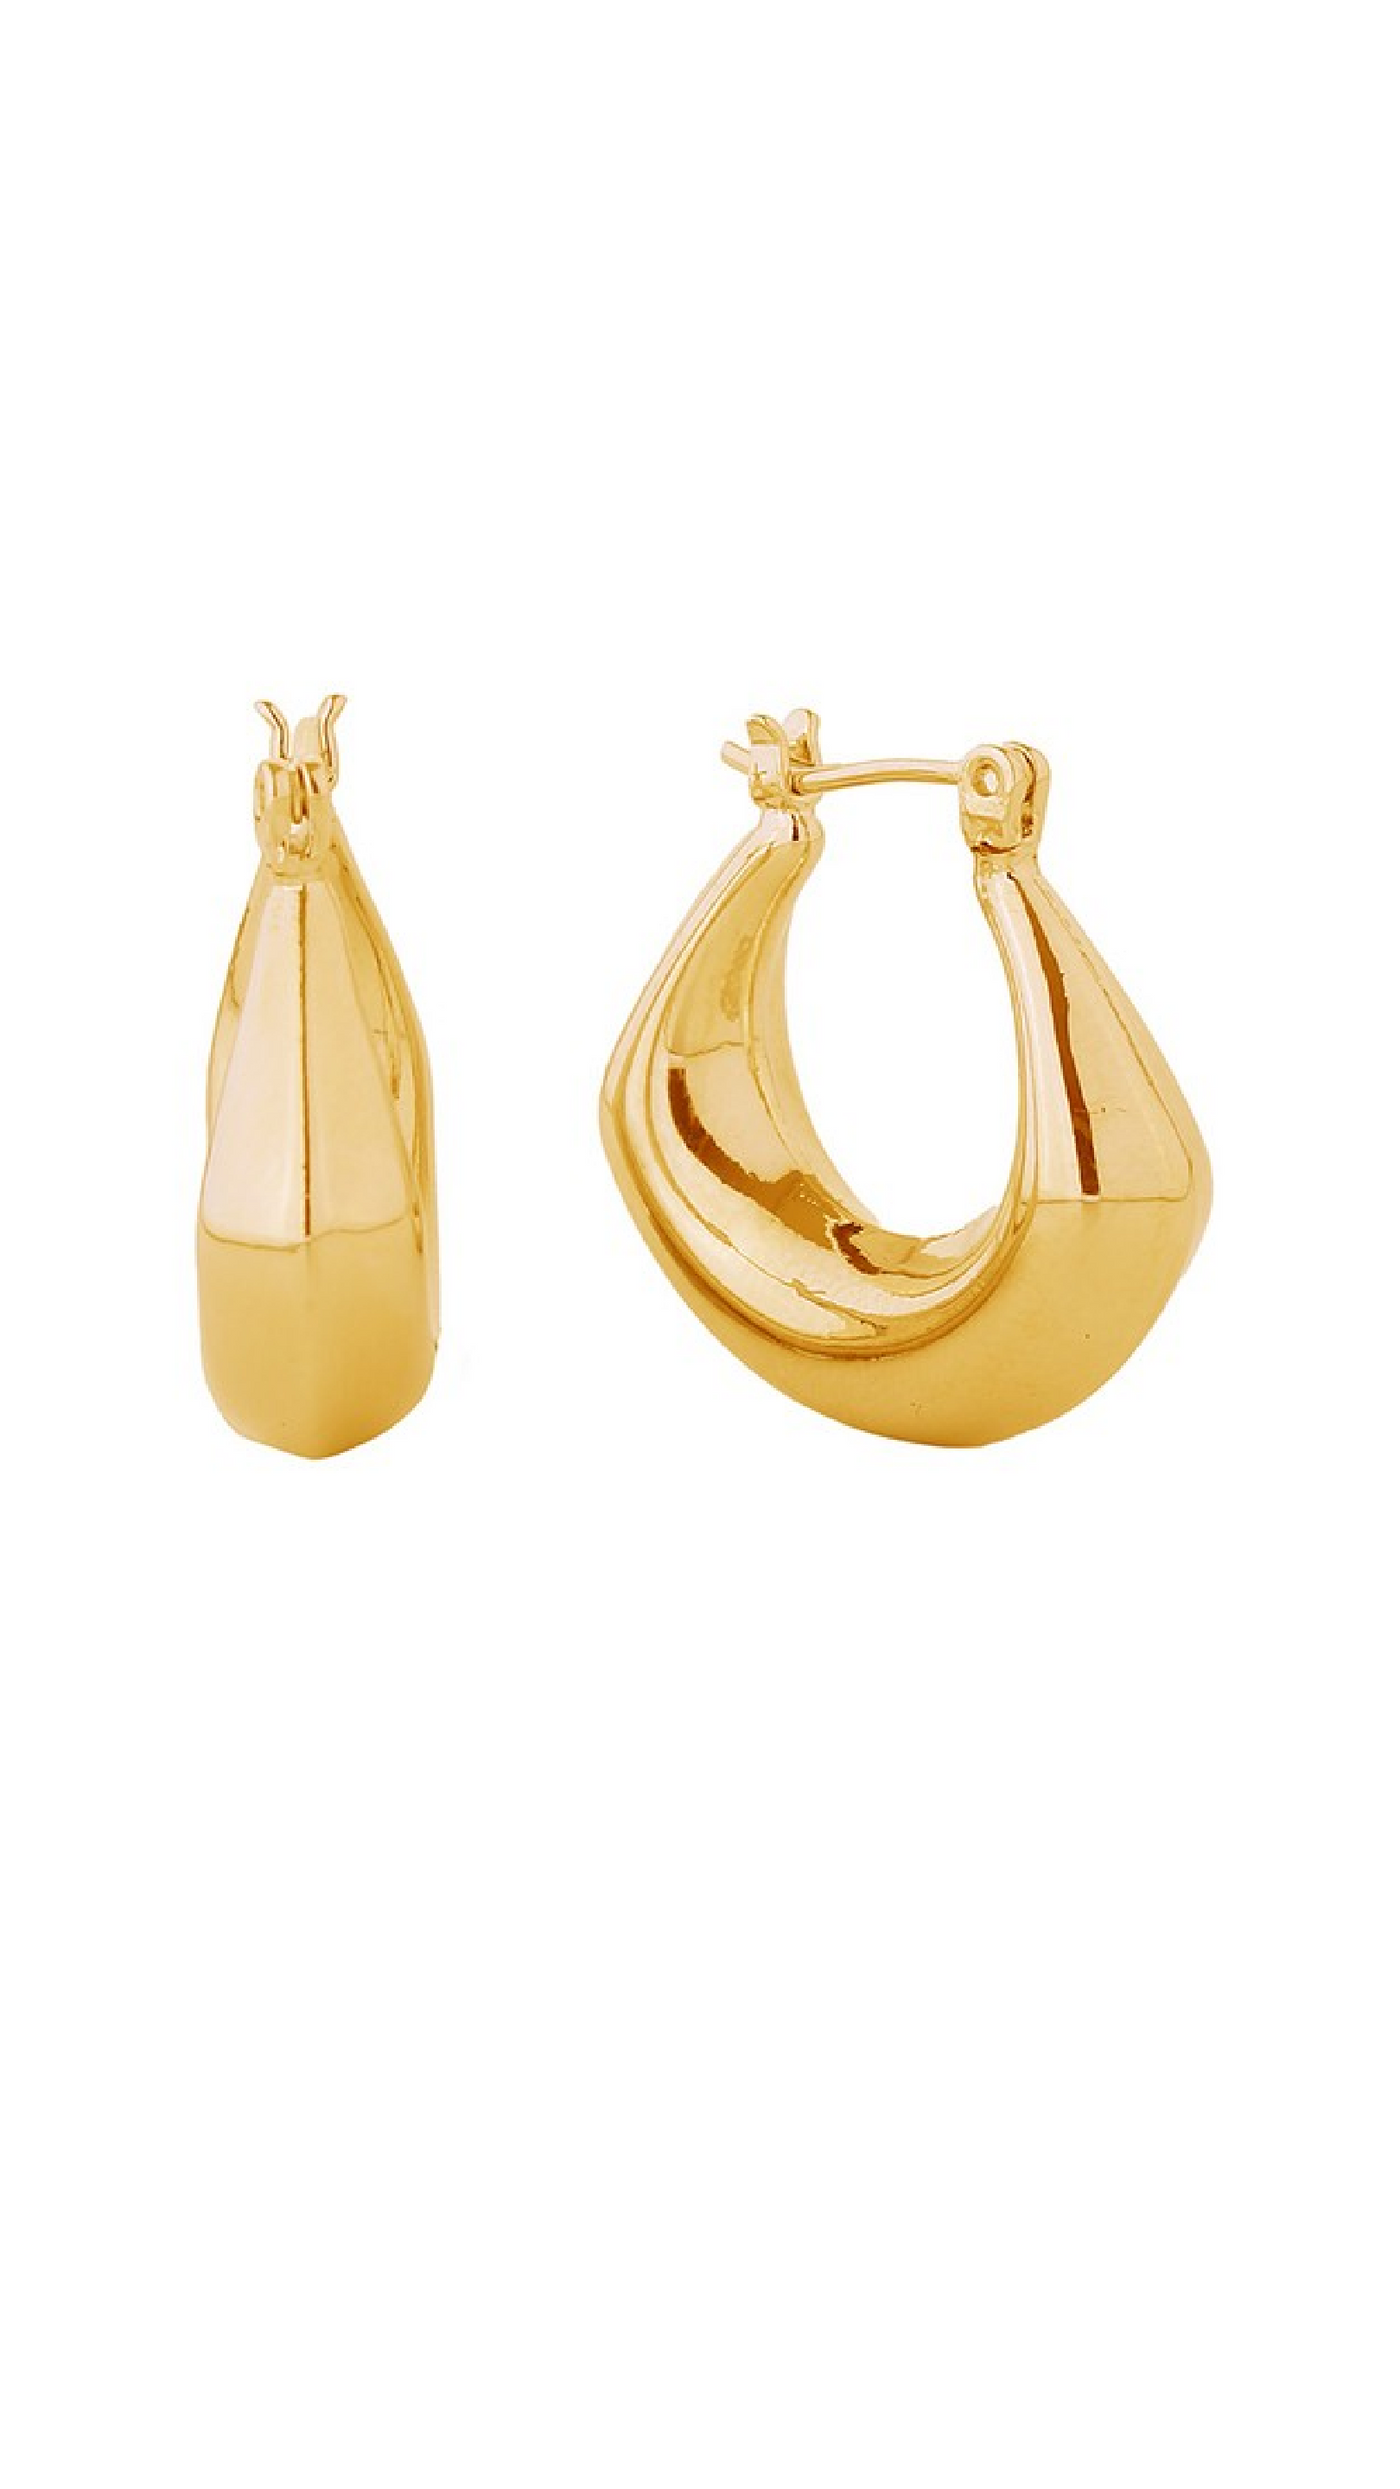 All about It Earrings - Gold - Piper and Hollow Boutique